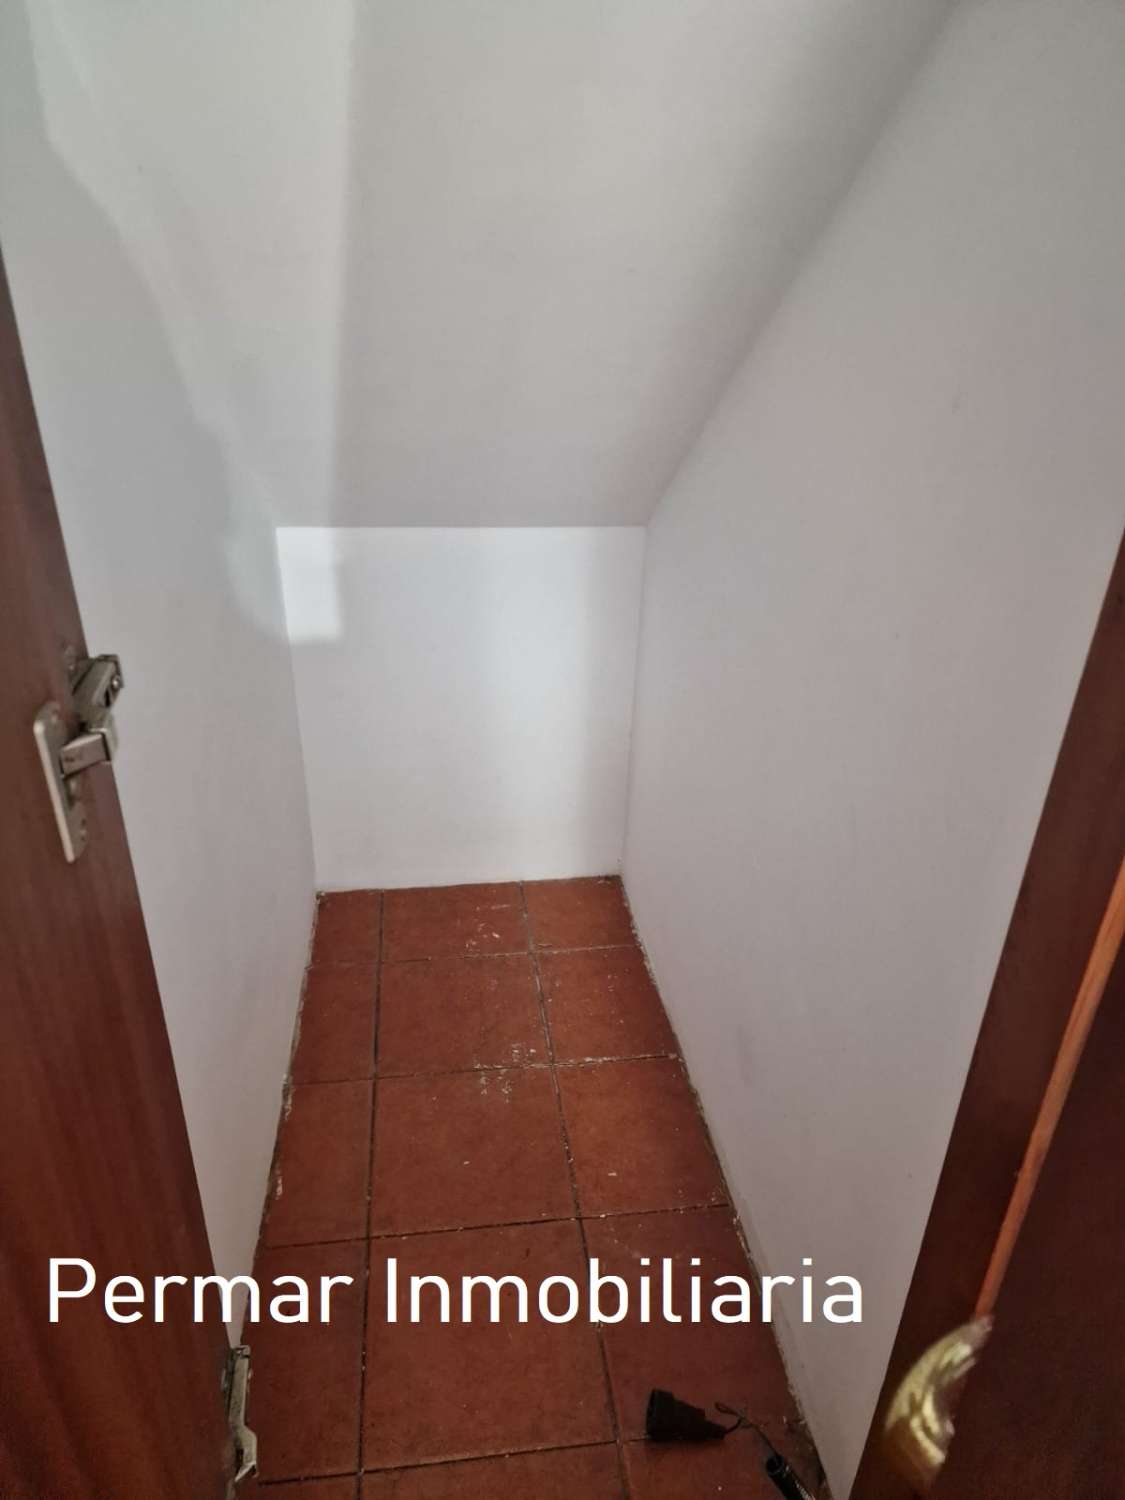 House for sale in Otañes